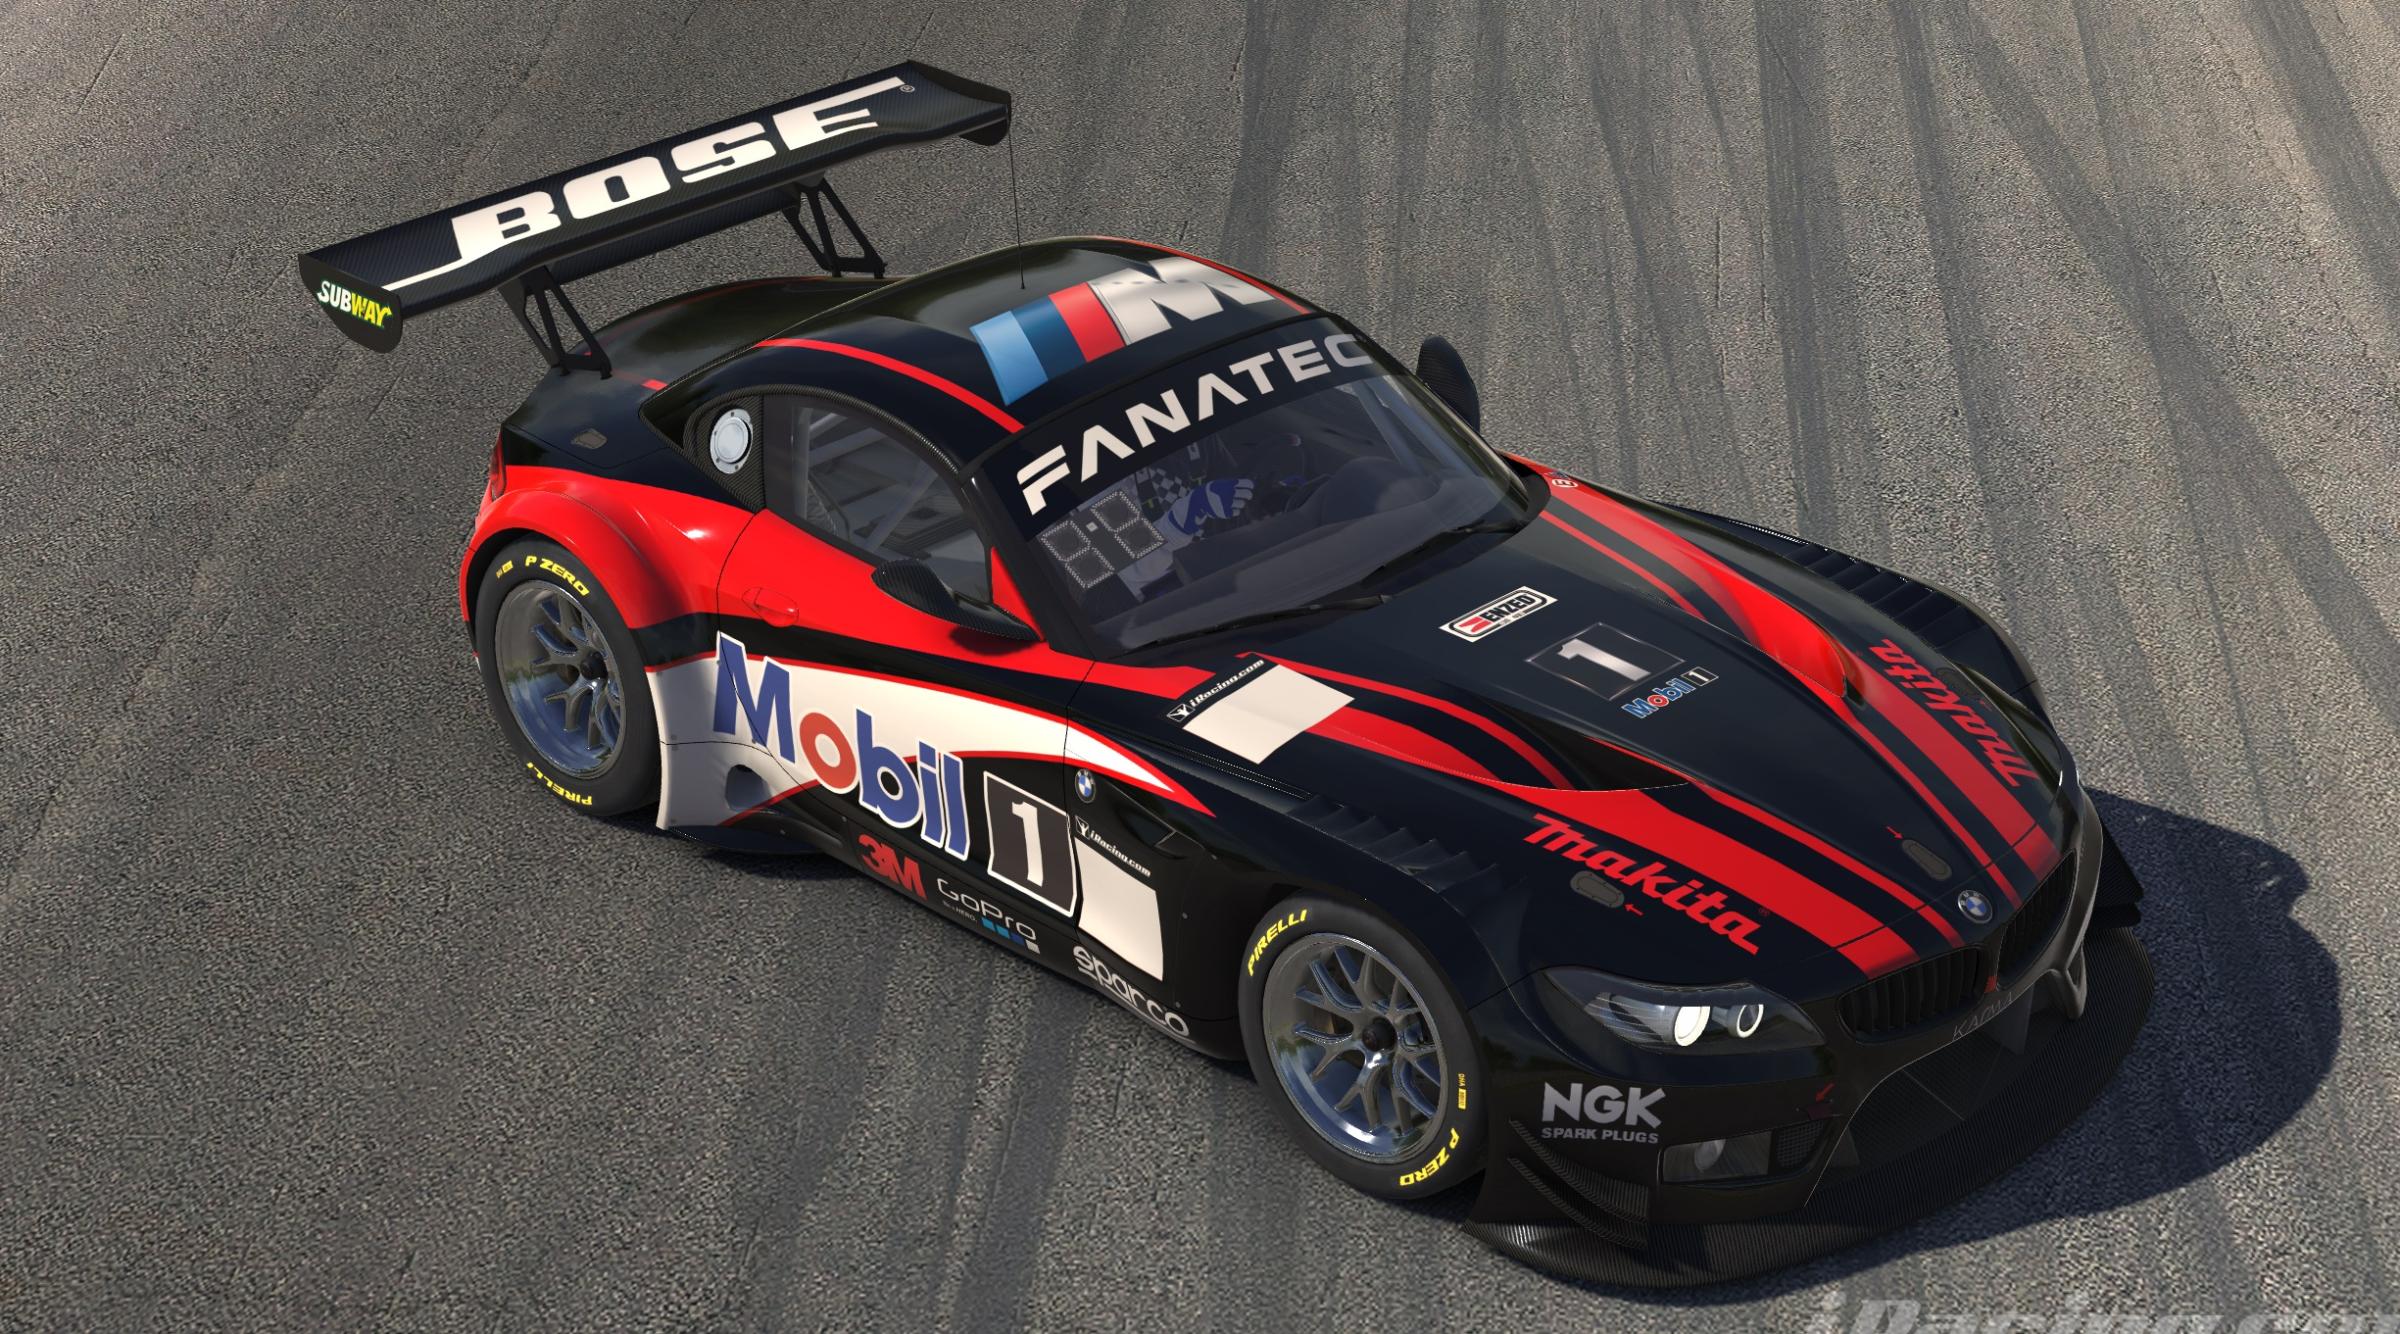  Mobil  1 BMW  Z4  by Tony P Trading Paints